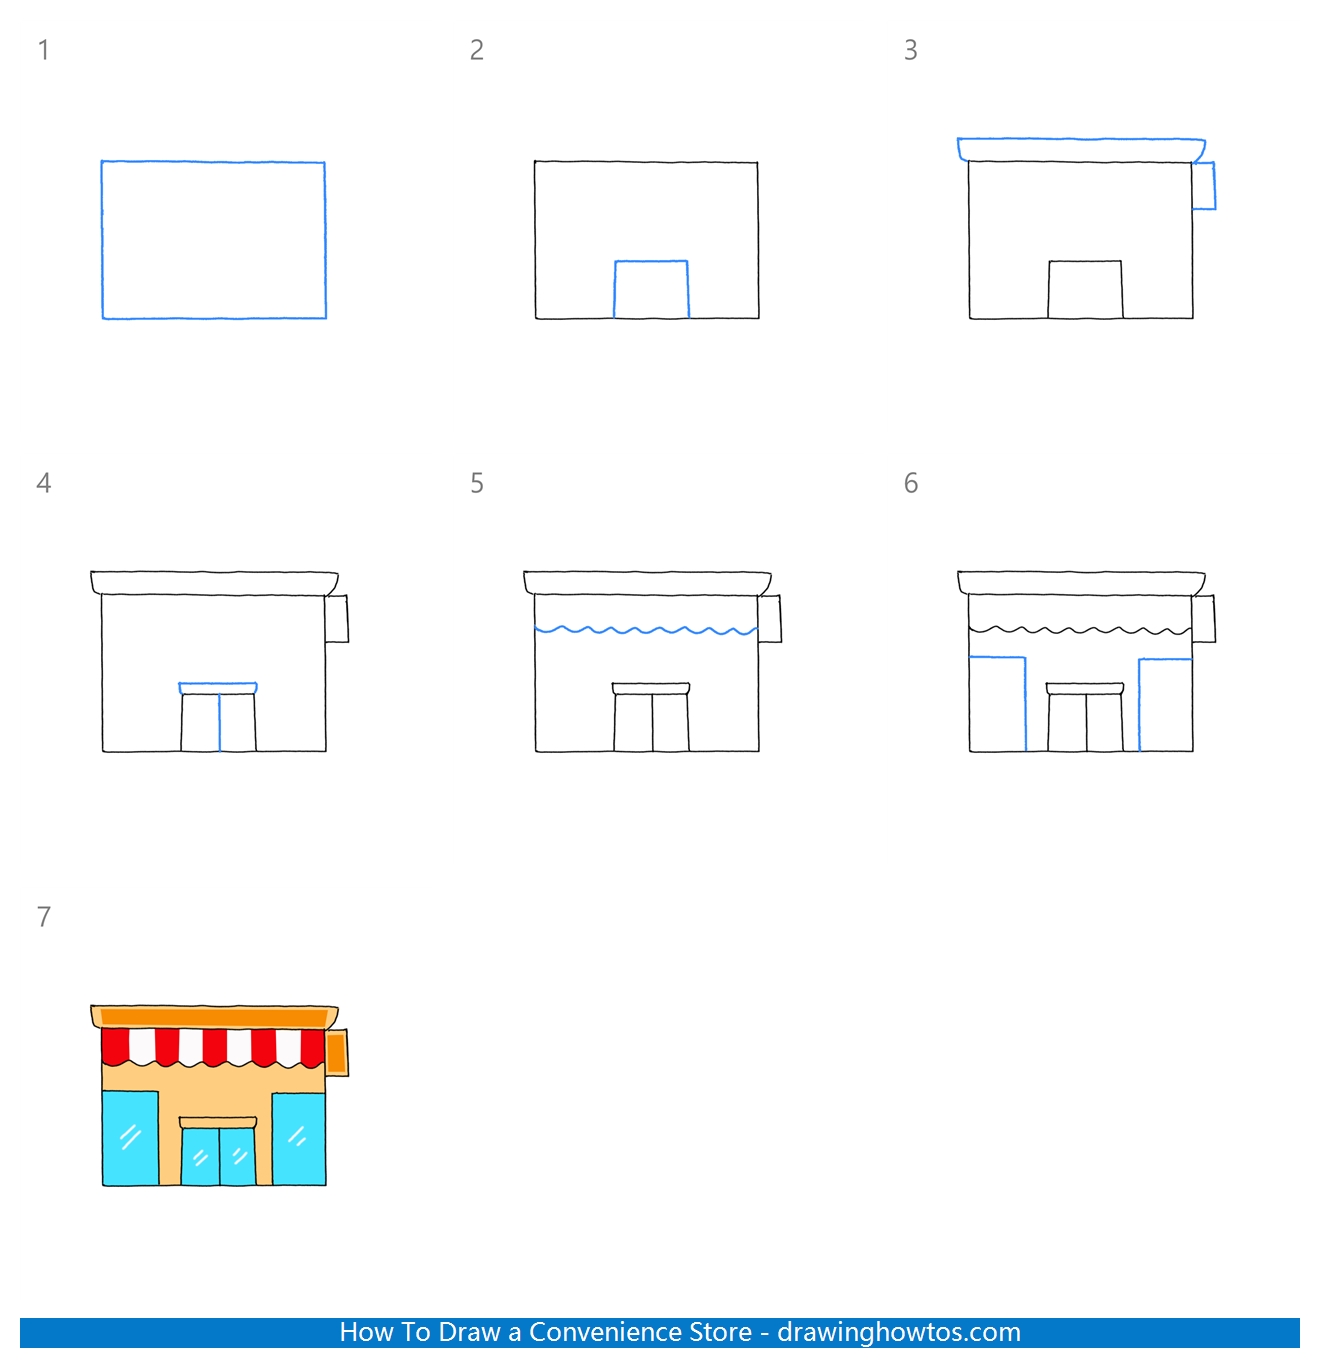 How to Draw a Convenience Store Step by Step